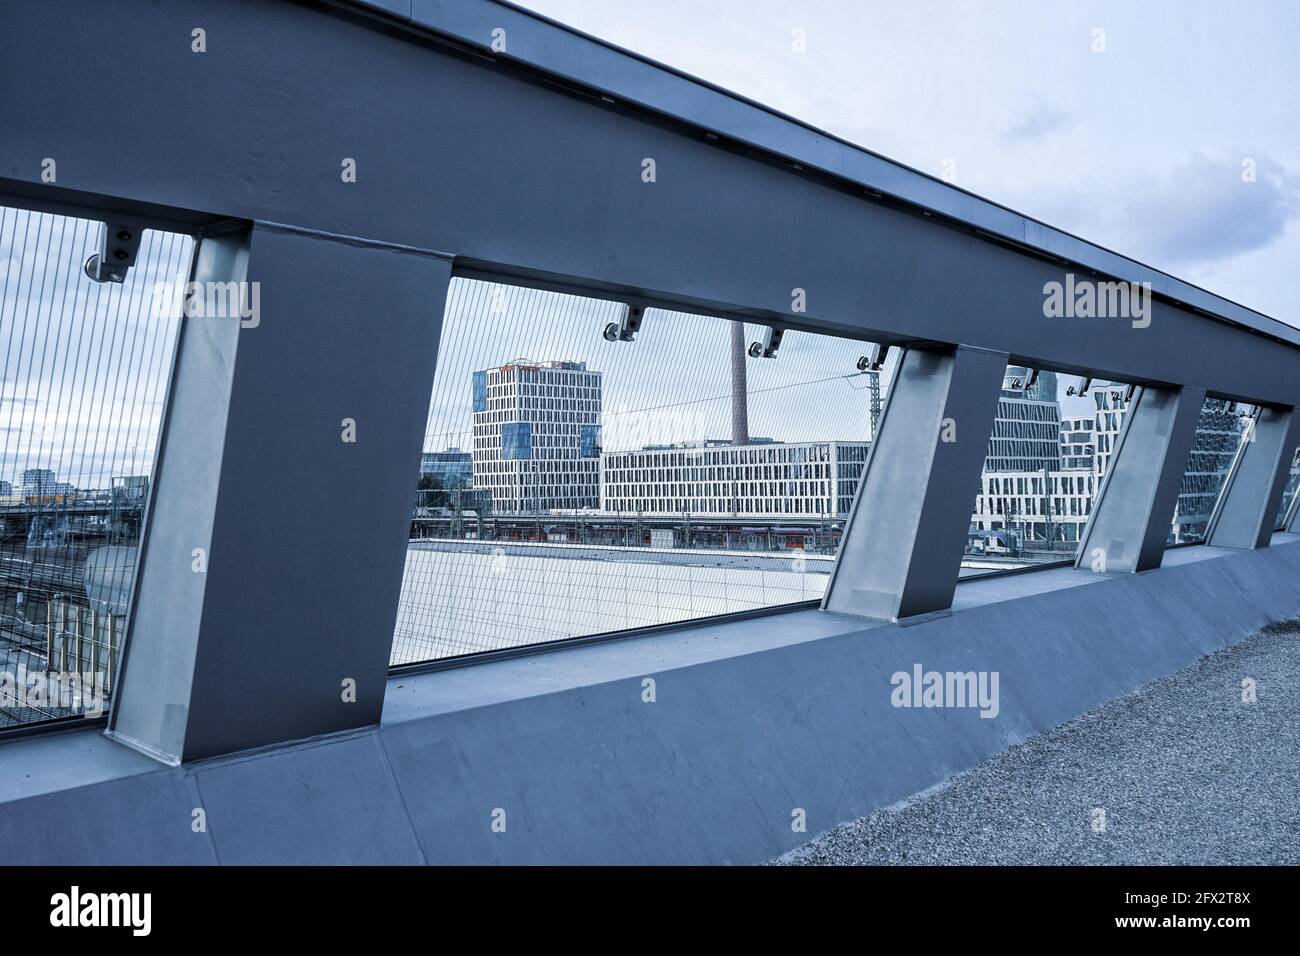 The Arnulfsteg is a 240-metre-long pedestrian and cyclist bridge over the railway tracks leading to Munich Central Station, completed in 2020. Stock Photo